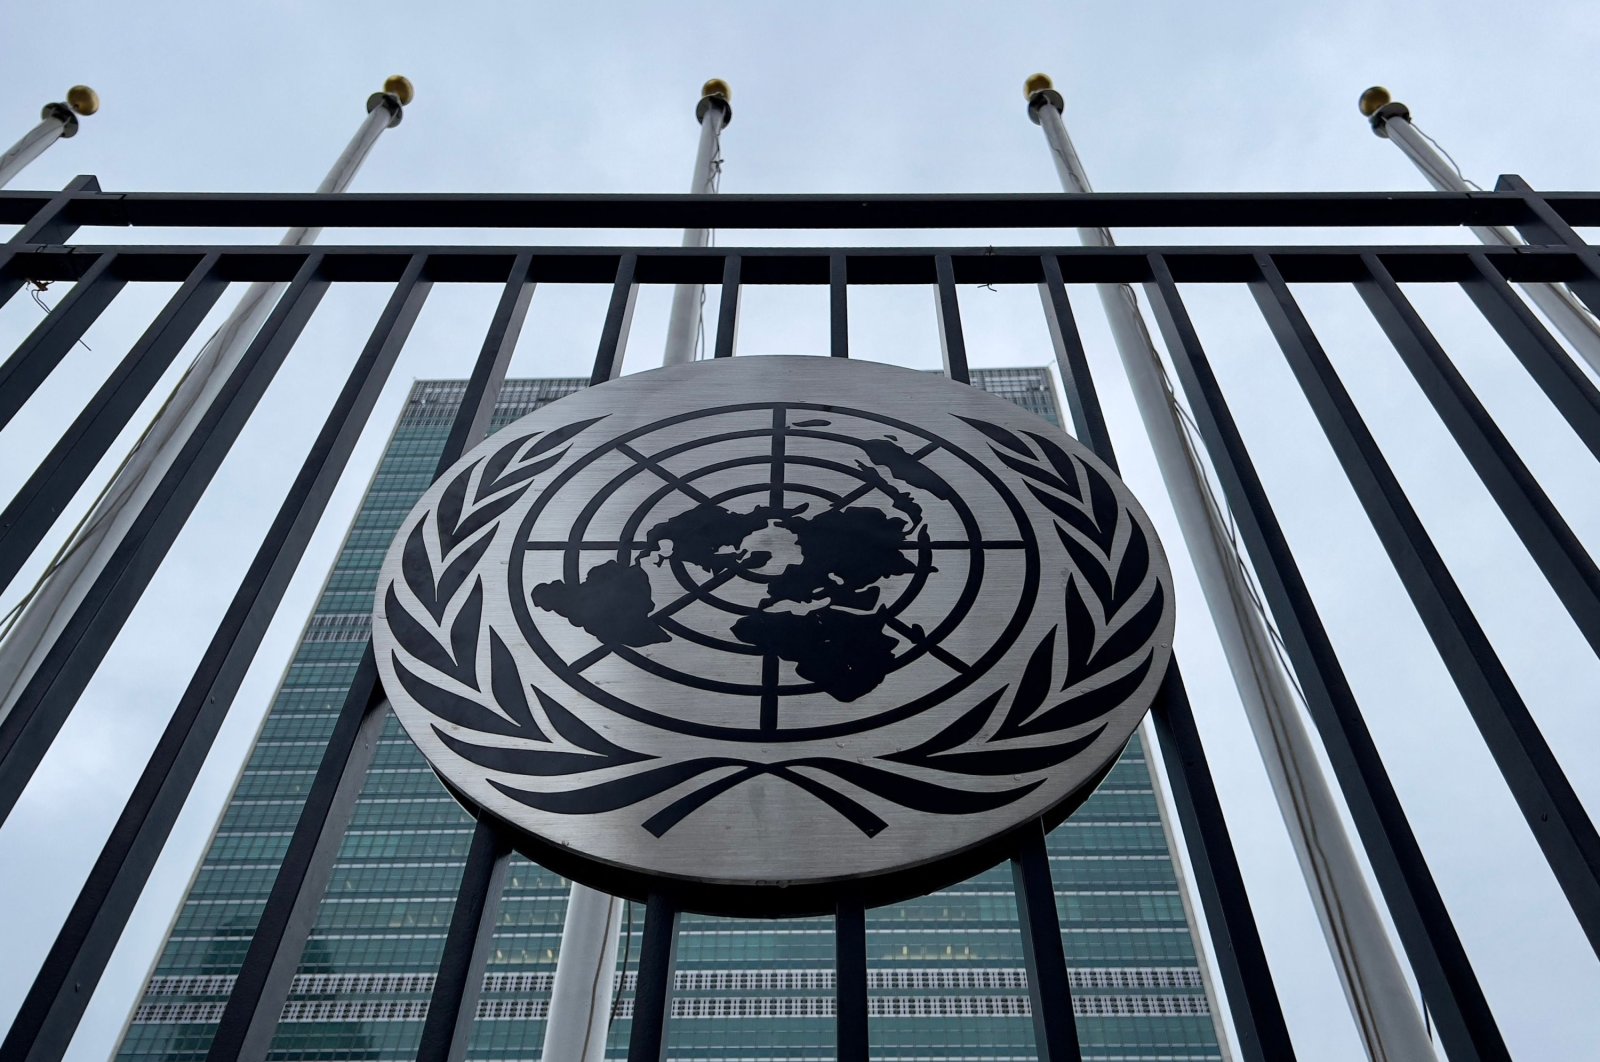 The entrance of the United Nations headquarters with a U.N. logo is seen in New York City, New York, U.S., Aug. 1, 2022. (AFP Photo)